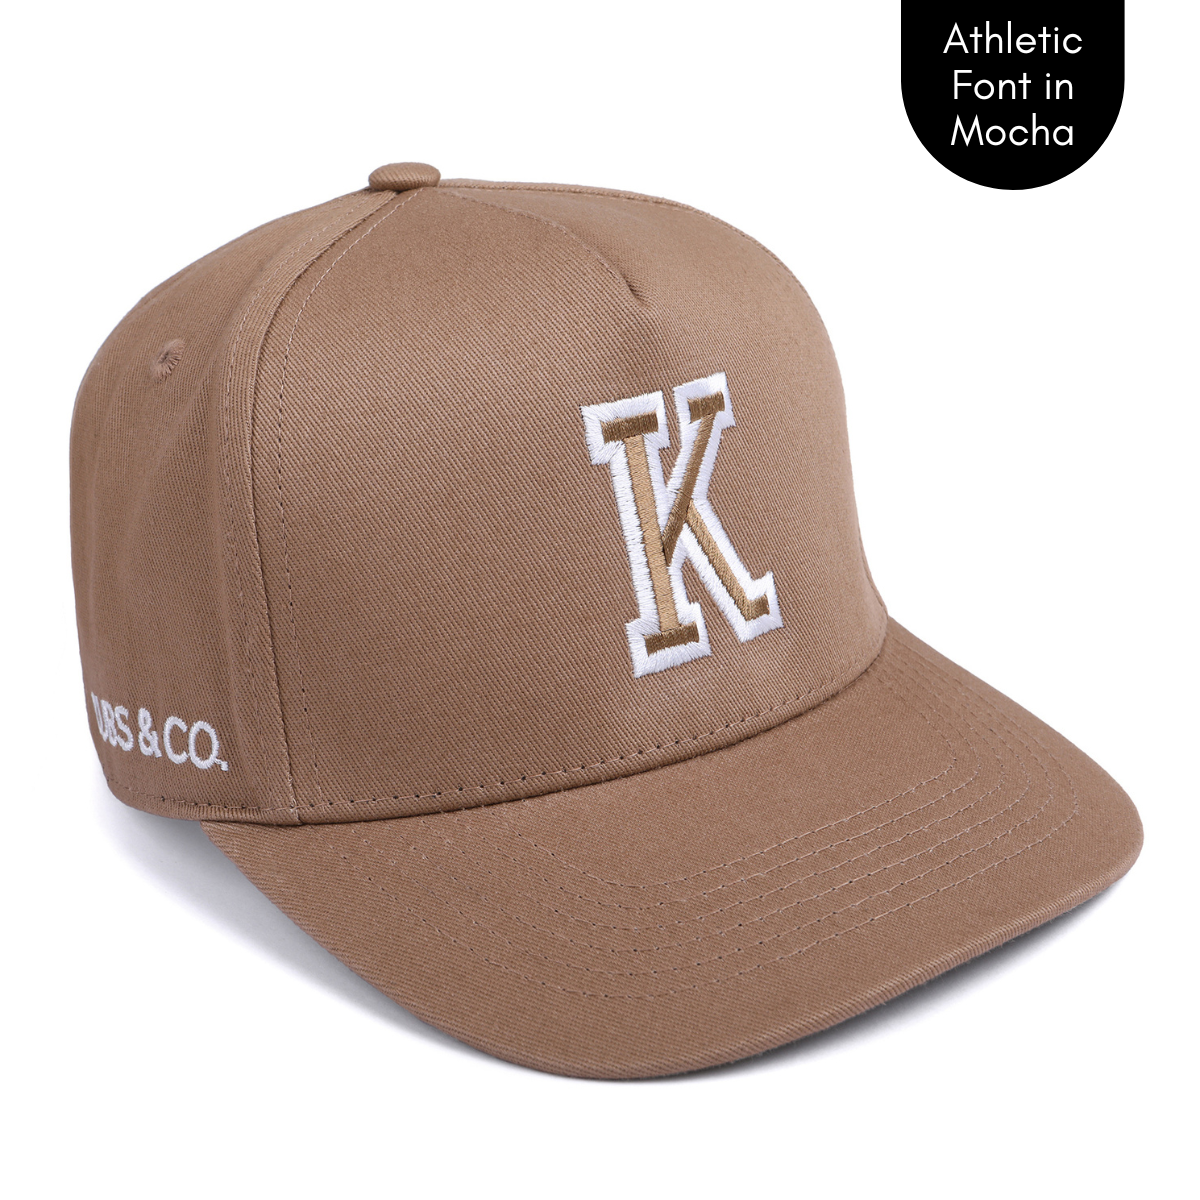 Dad and Kids Matching Hats  Father's Day Gift Idea – Cubs & Co.